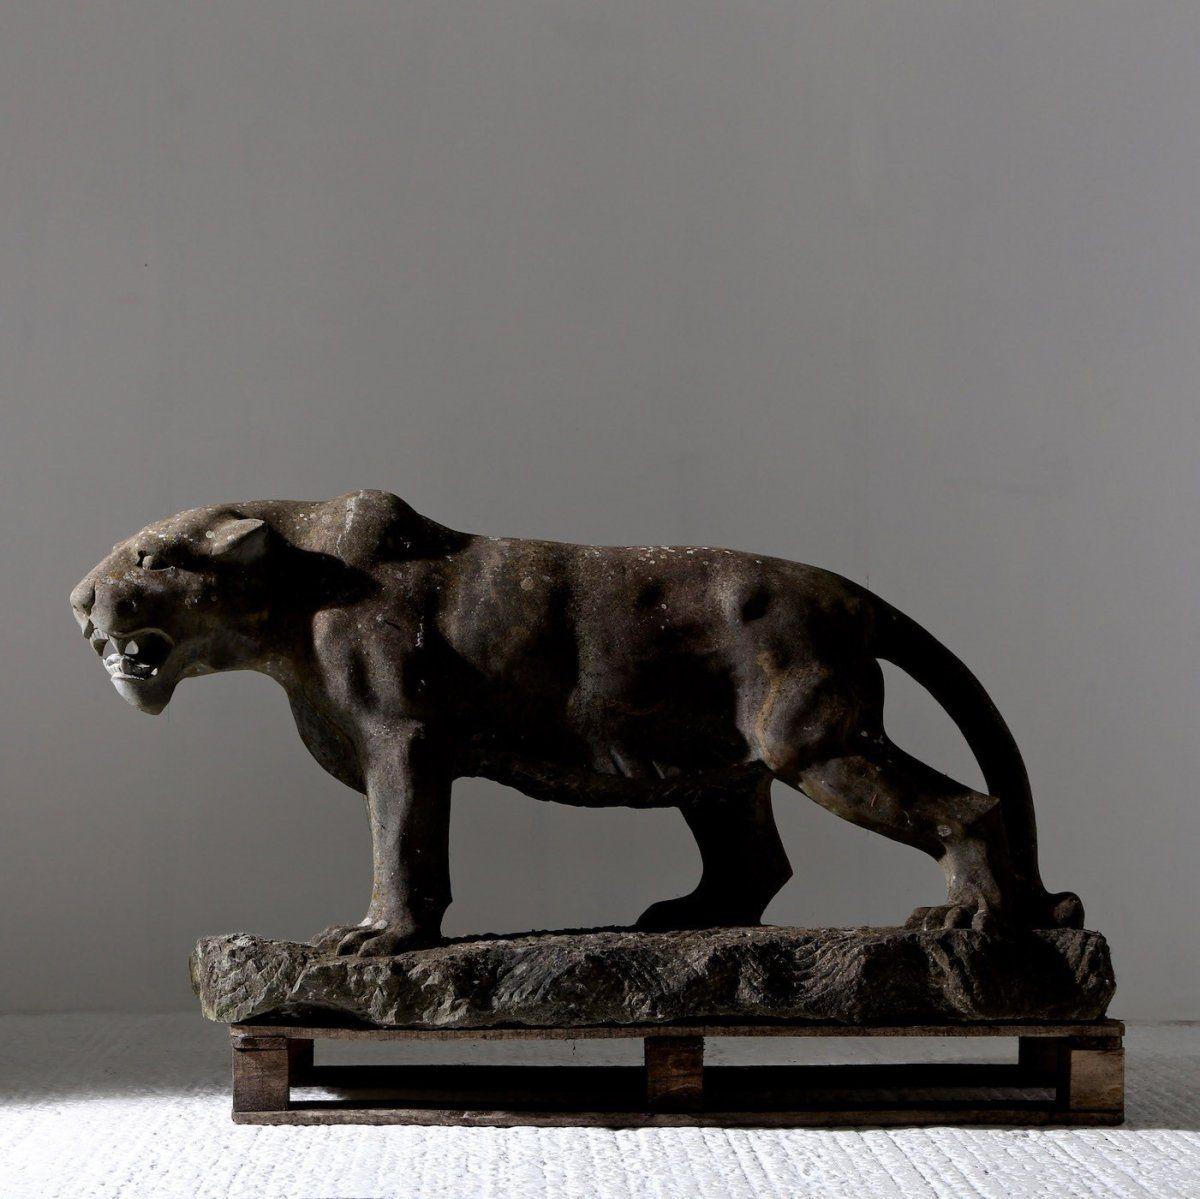 Impressive architectural stone panther / jaguar.
Circa 1930. Not a molded or reconstructed stone but a true hand carved 